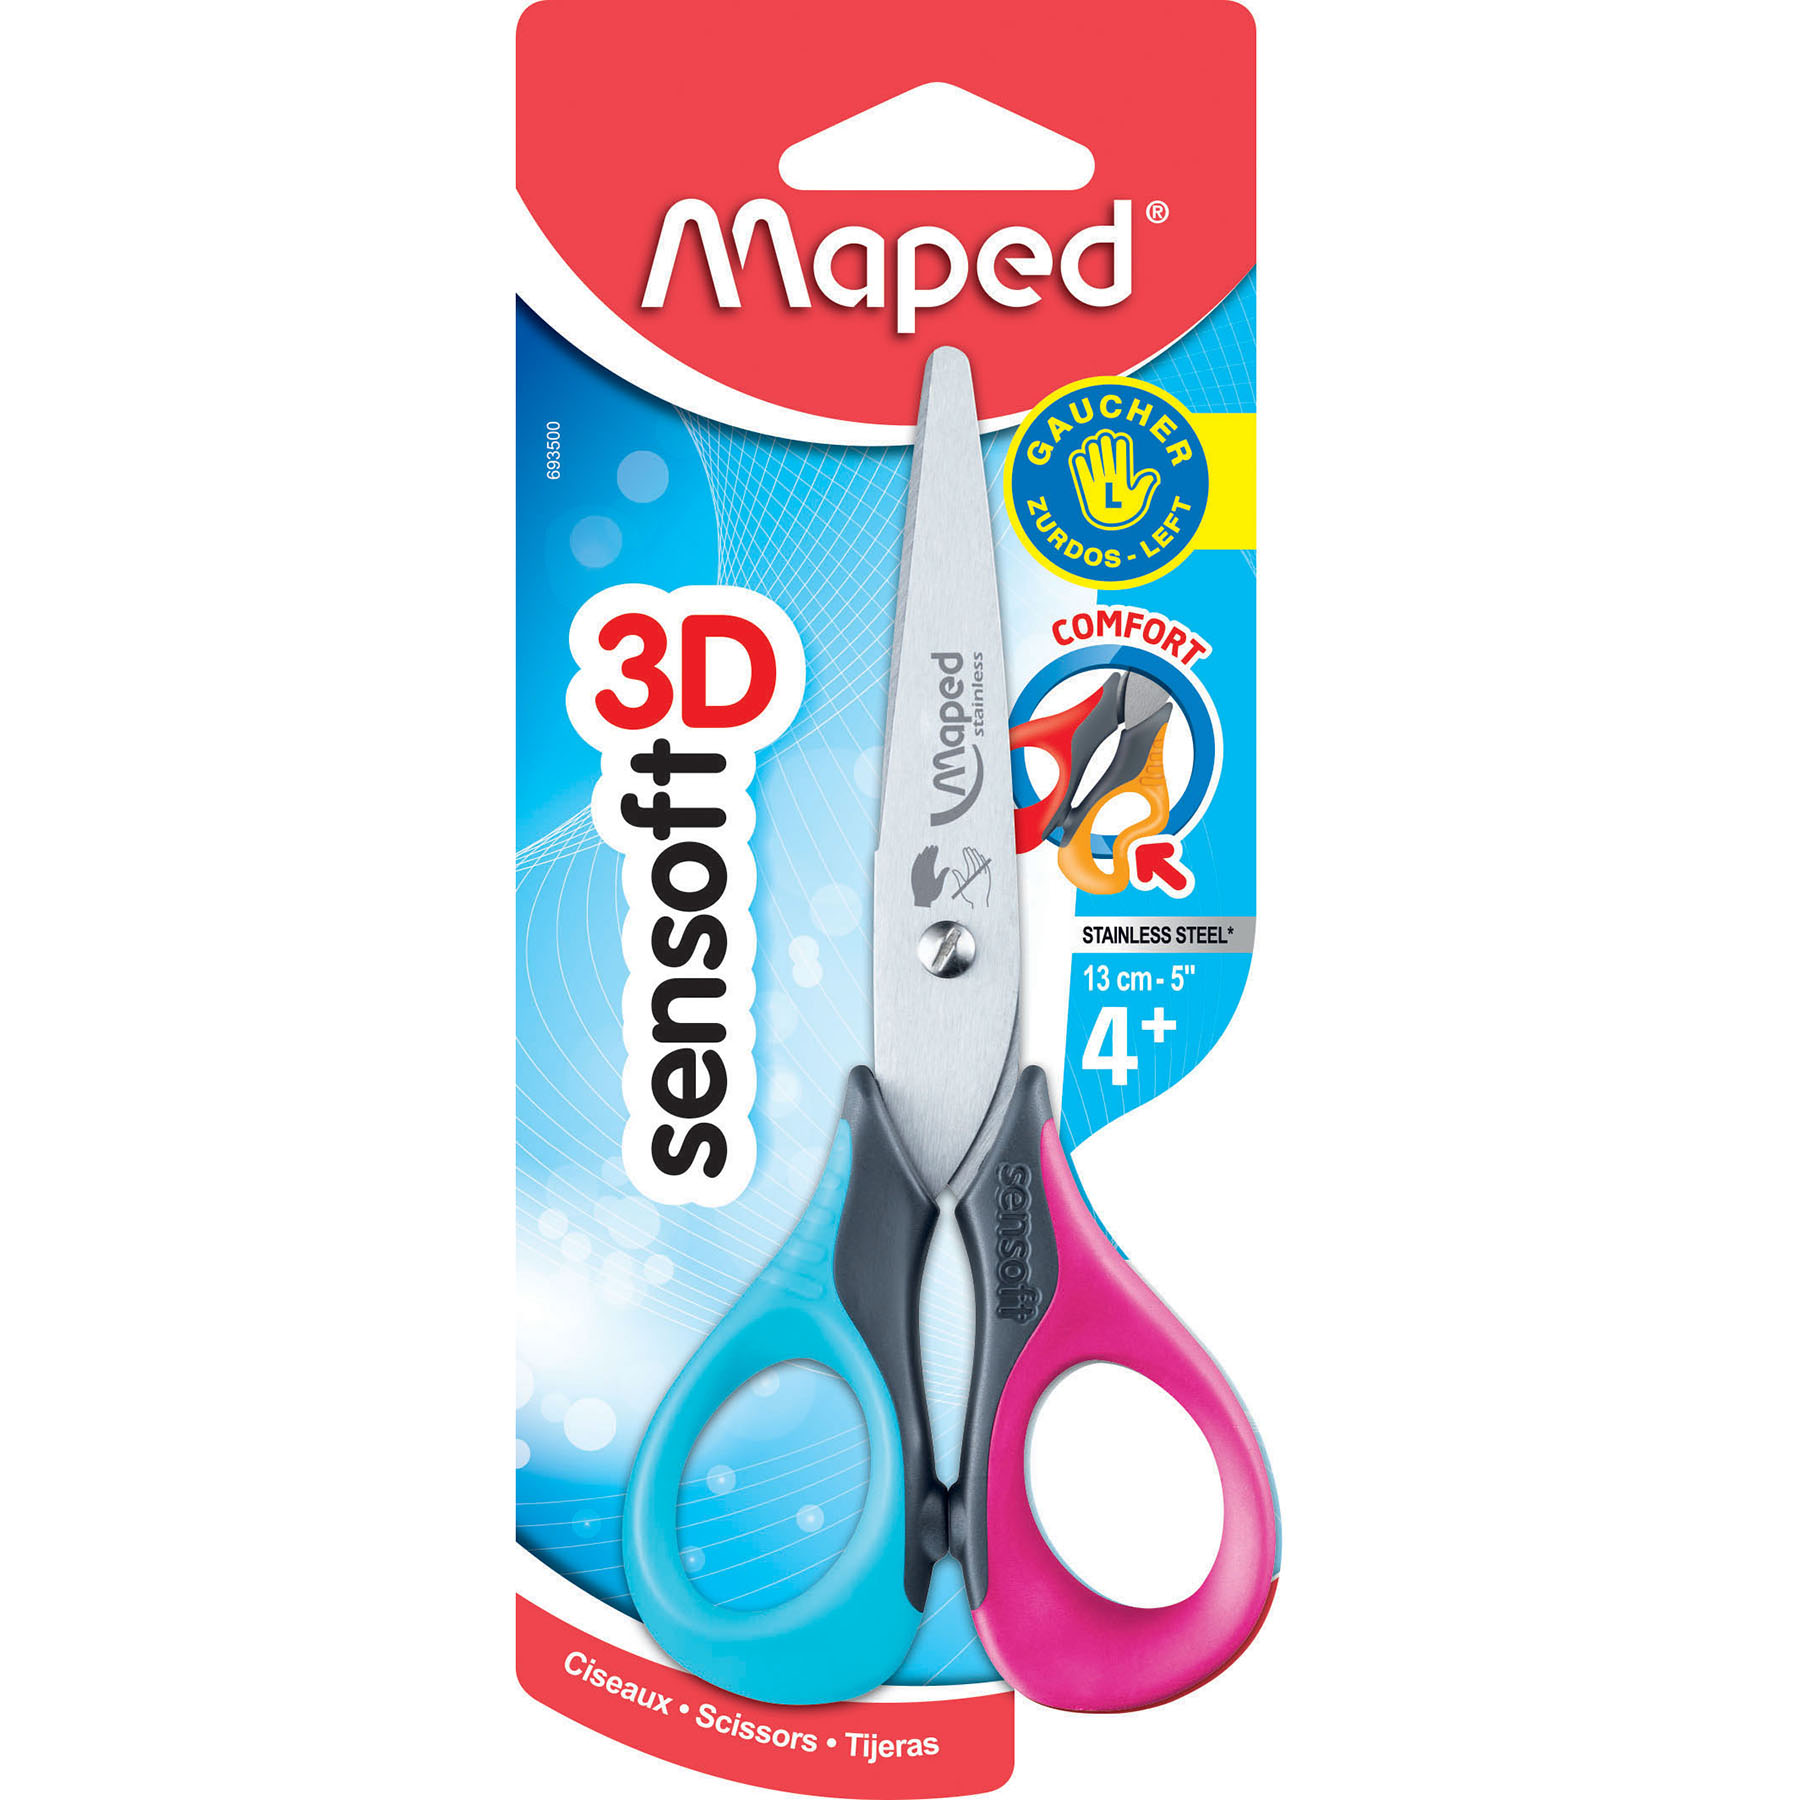 Maped Koopy Spring-Assisted Educational Scissors 5 / 13cm